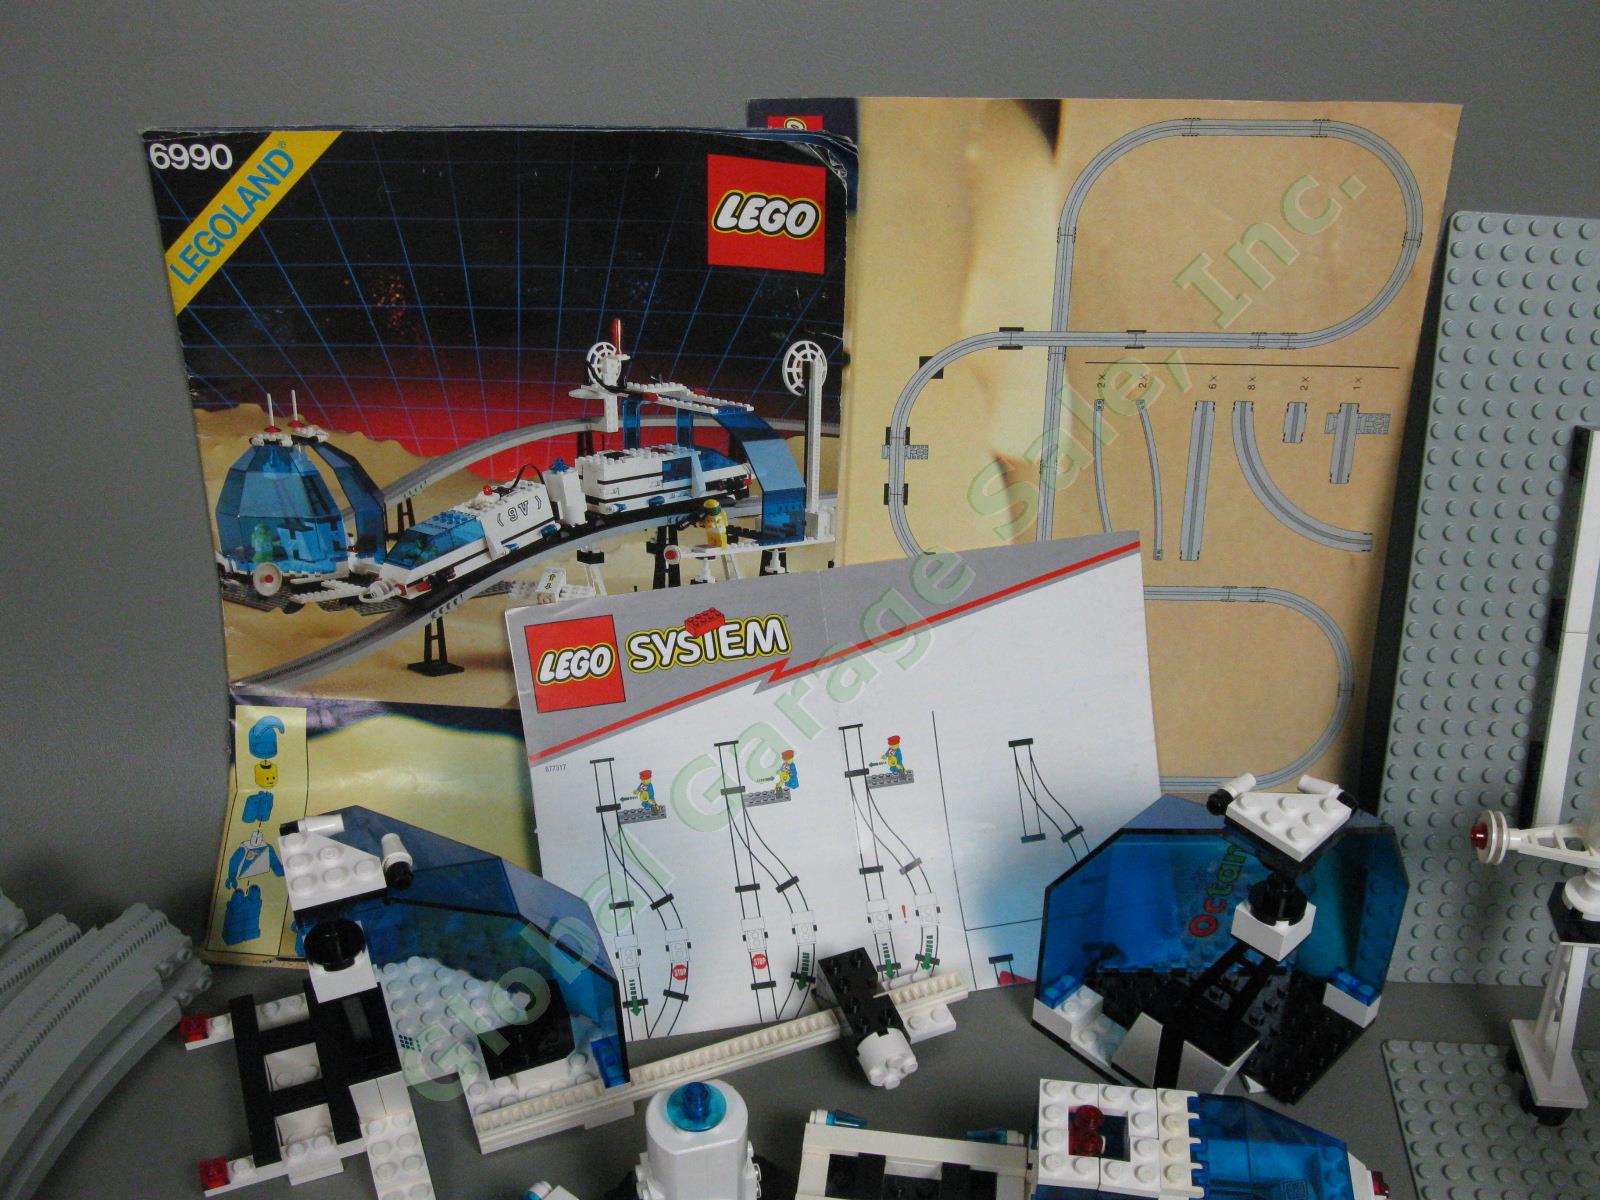 Lego Classic Space #6990 Monorail Transport Station + Instructions Manual 1990 1